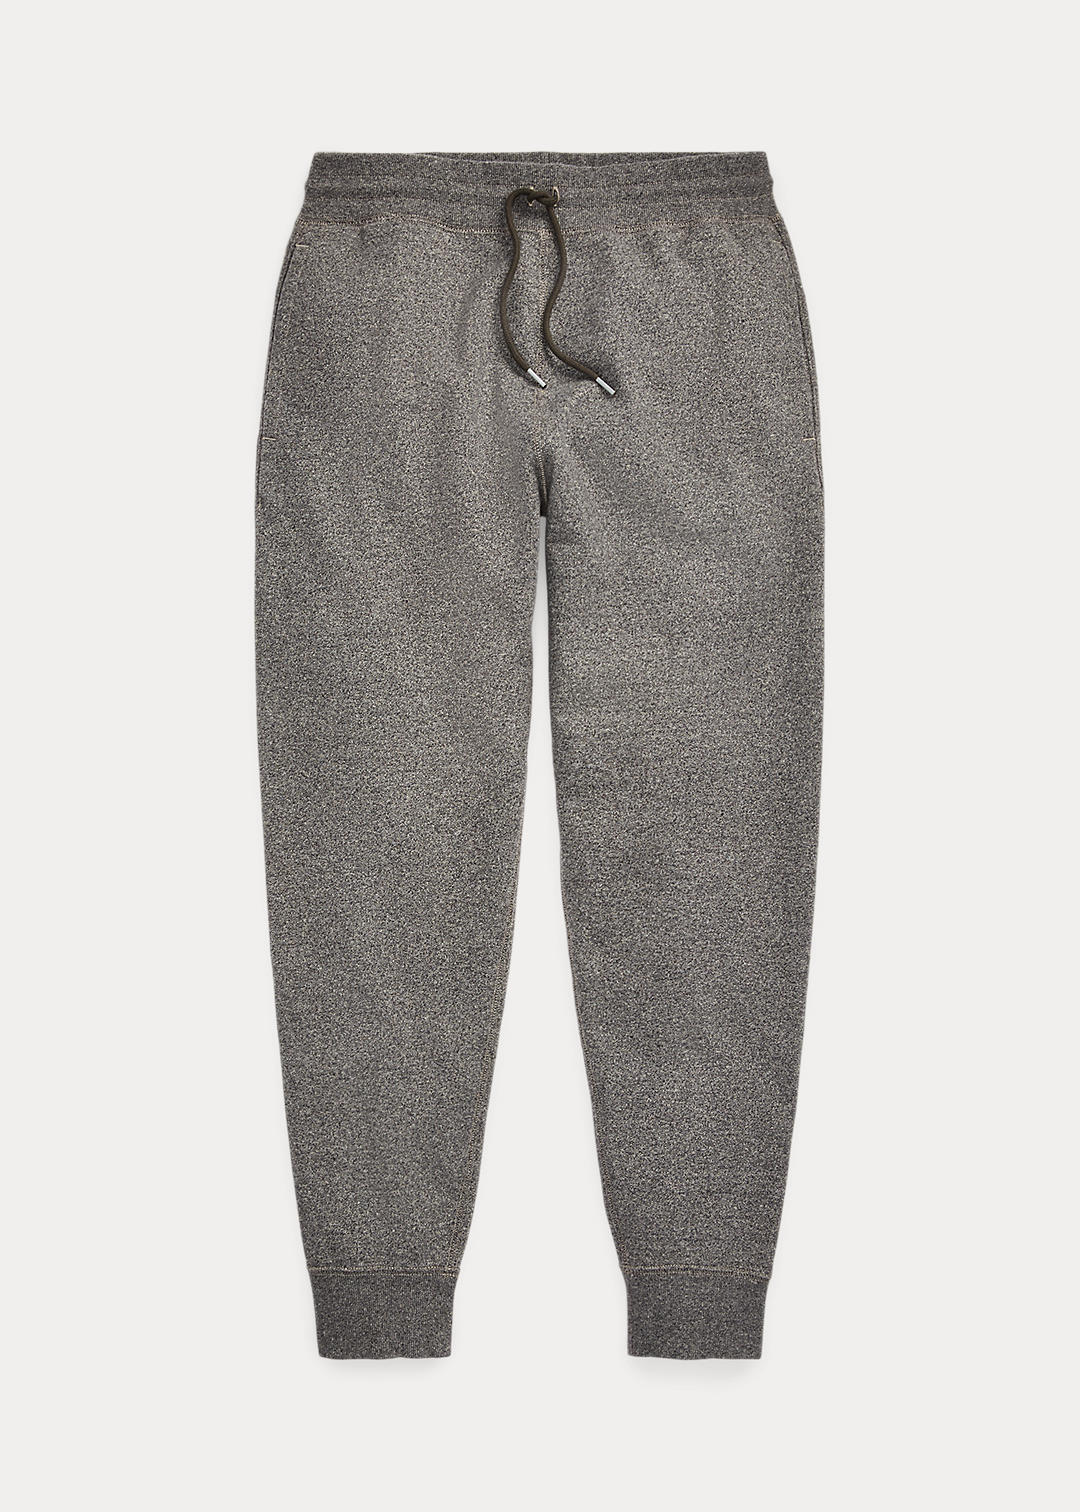 French Terry Sweatpant